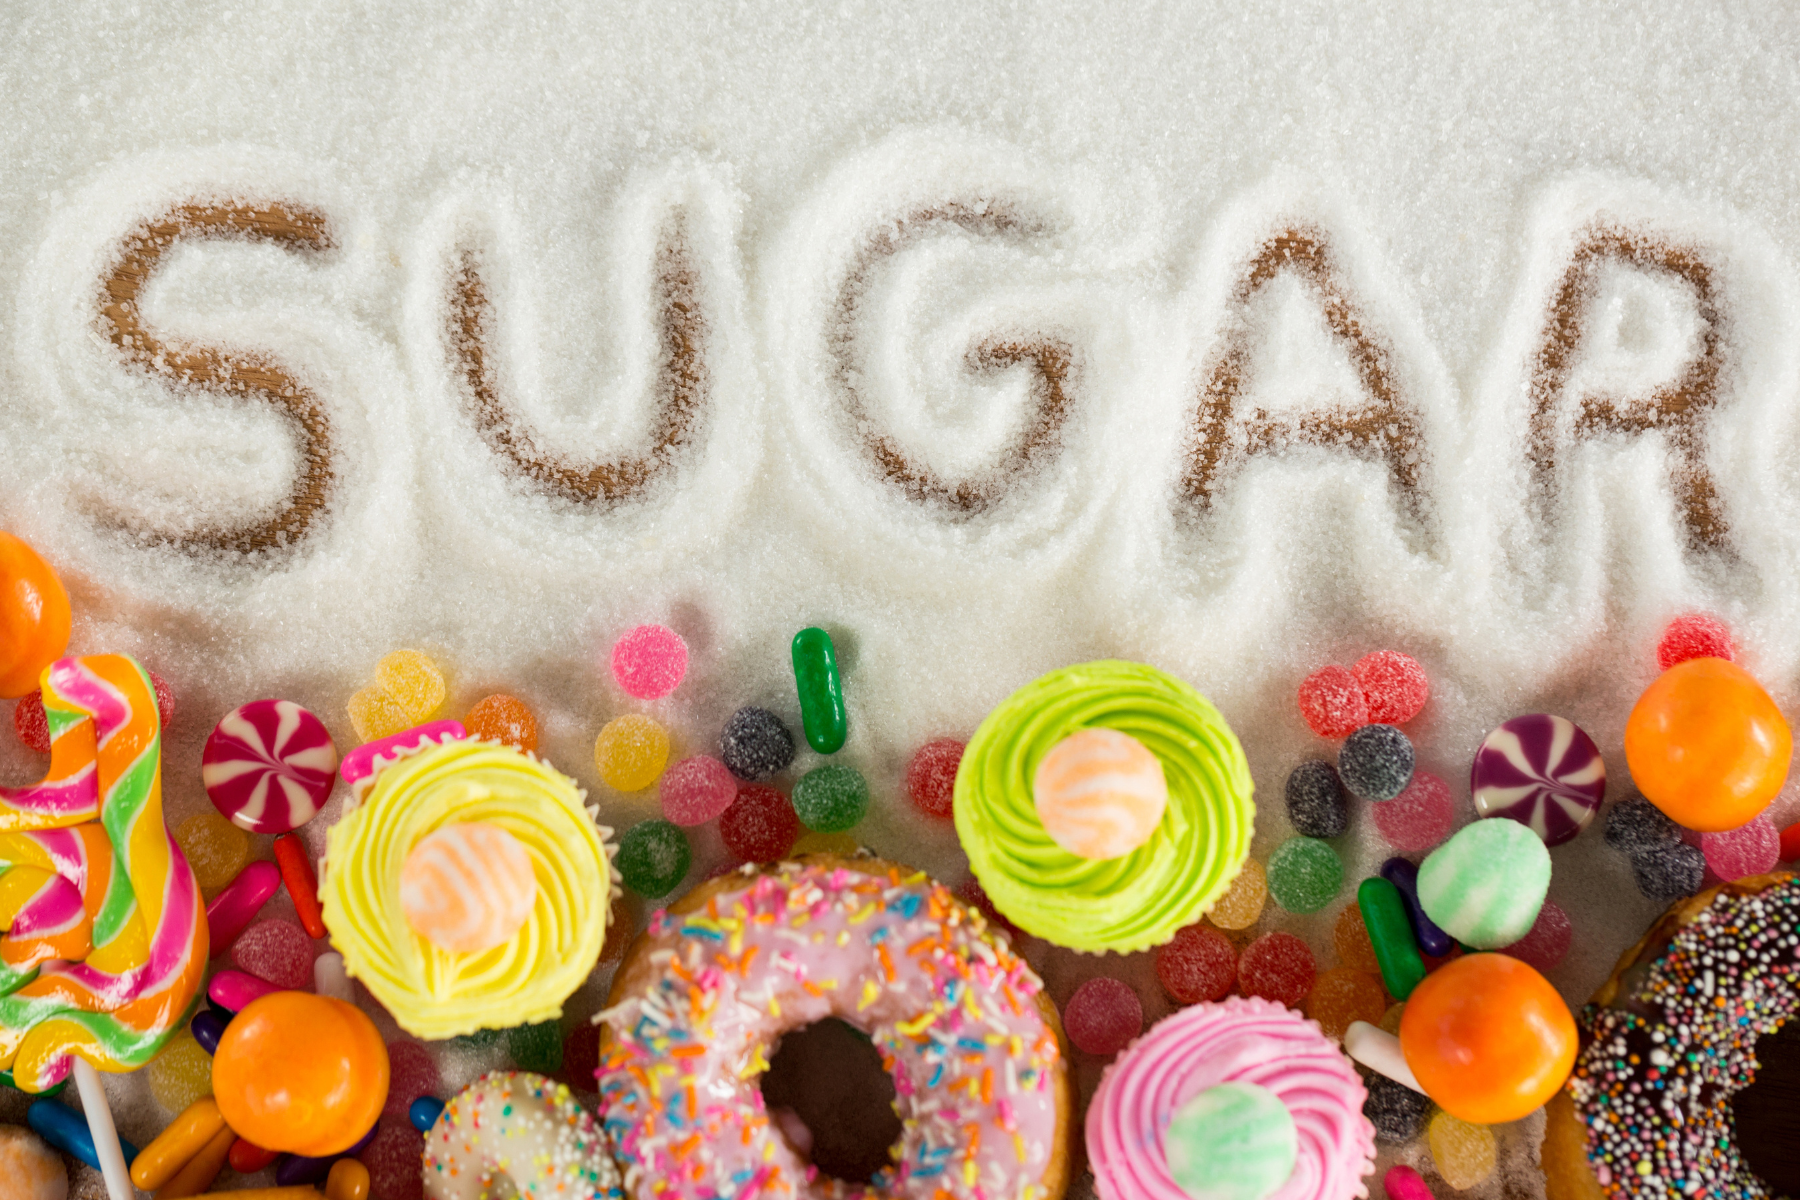 What happens when you eat too much added sugar?